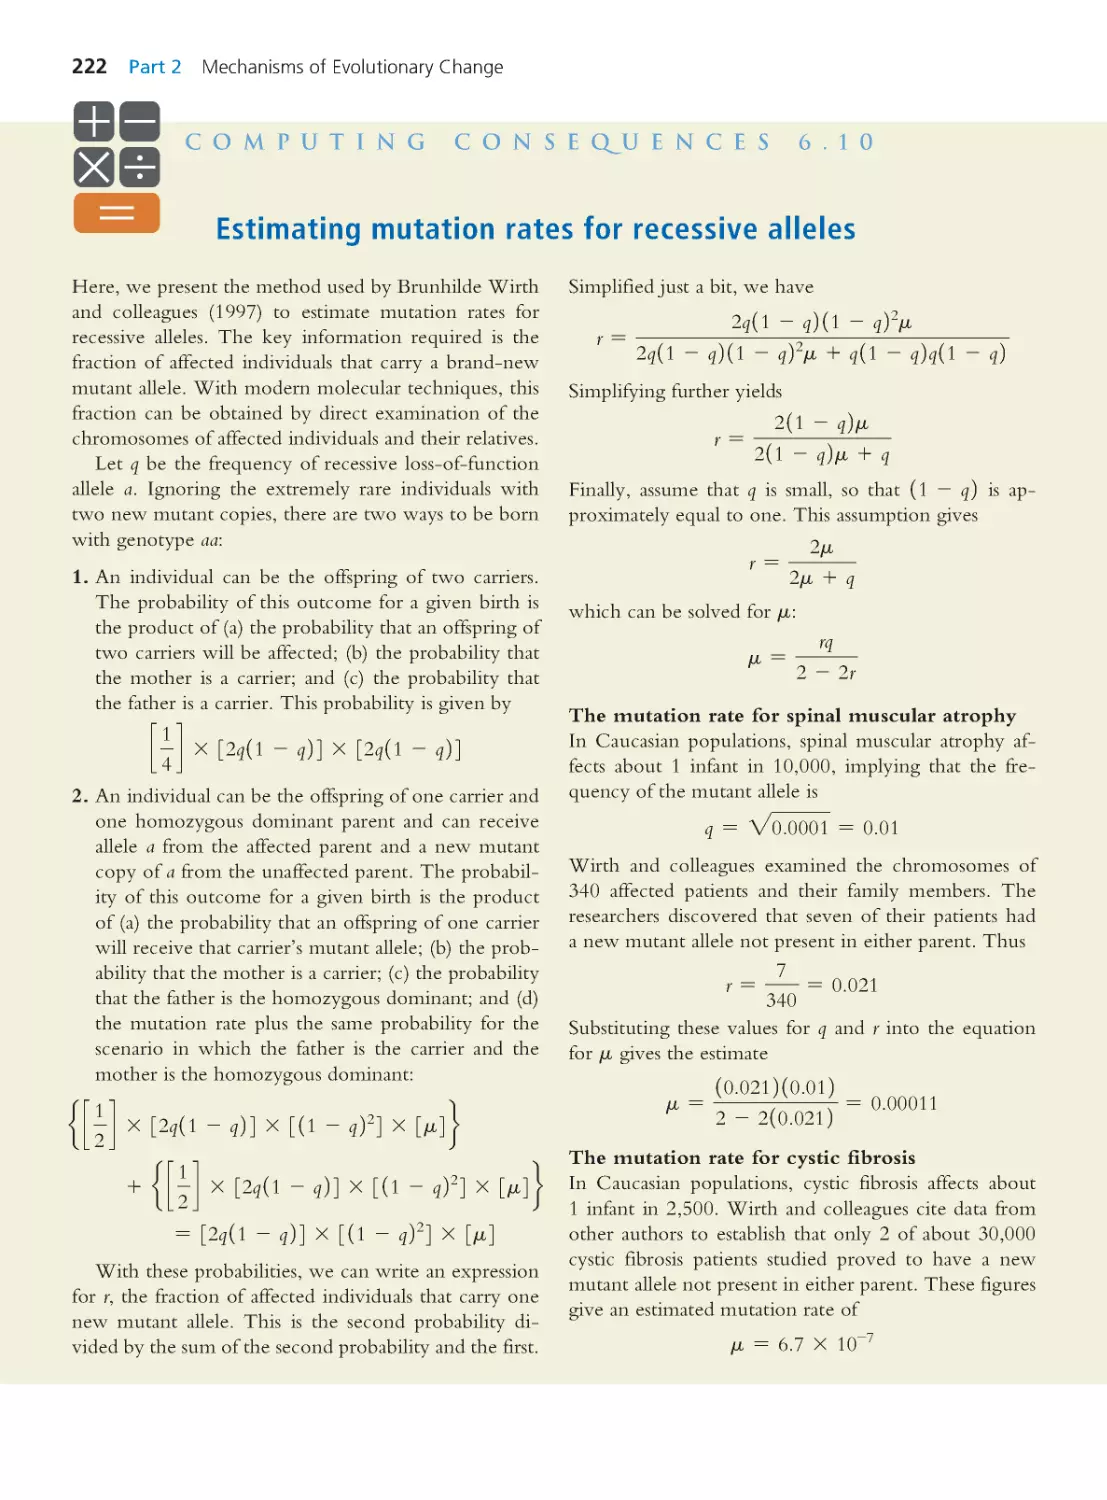 Computing Consequences 6.10 Estimating mutation rates for recessive alleles